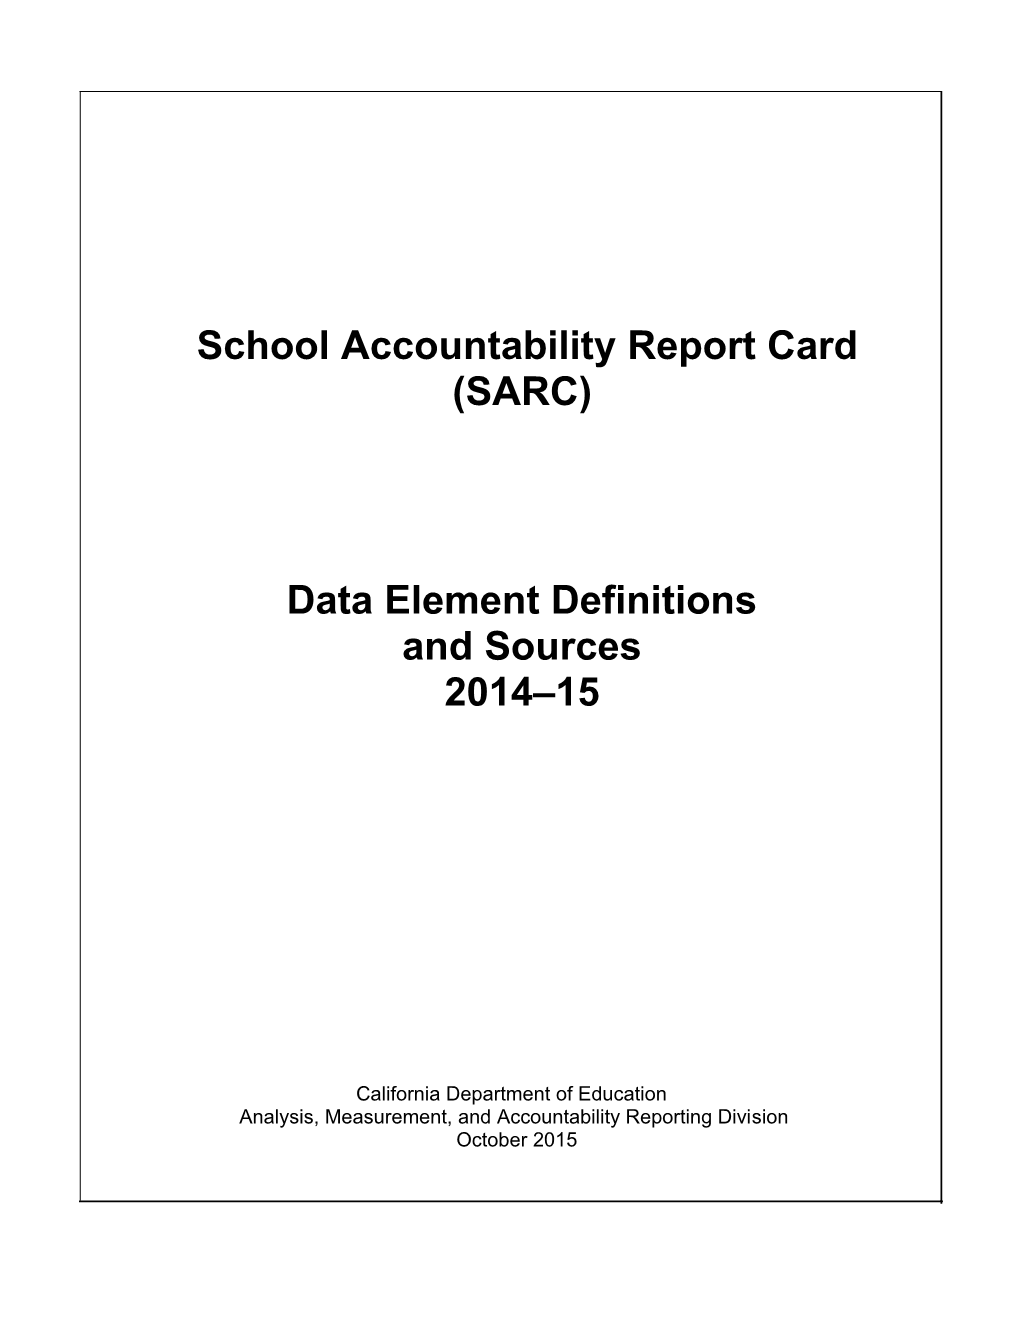 Data Element Definitions and Sources 2014-15 - School Accountability Report Card (CA Dept